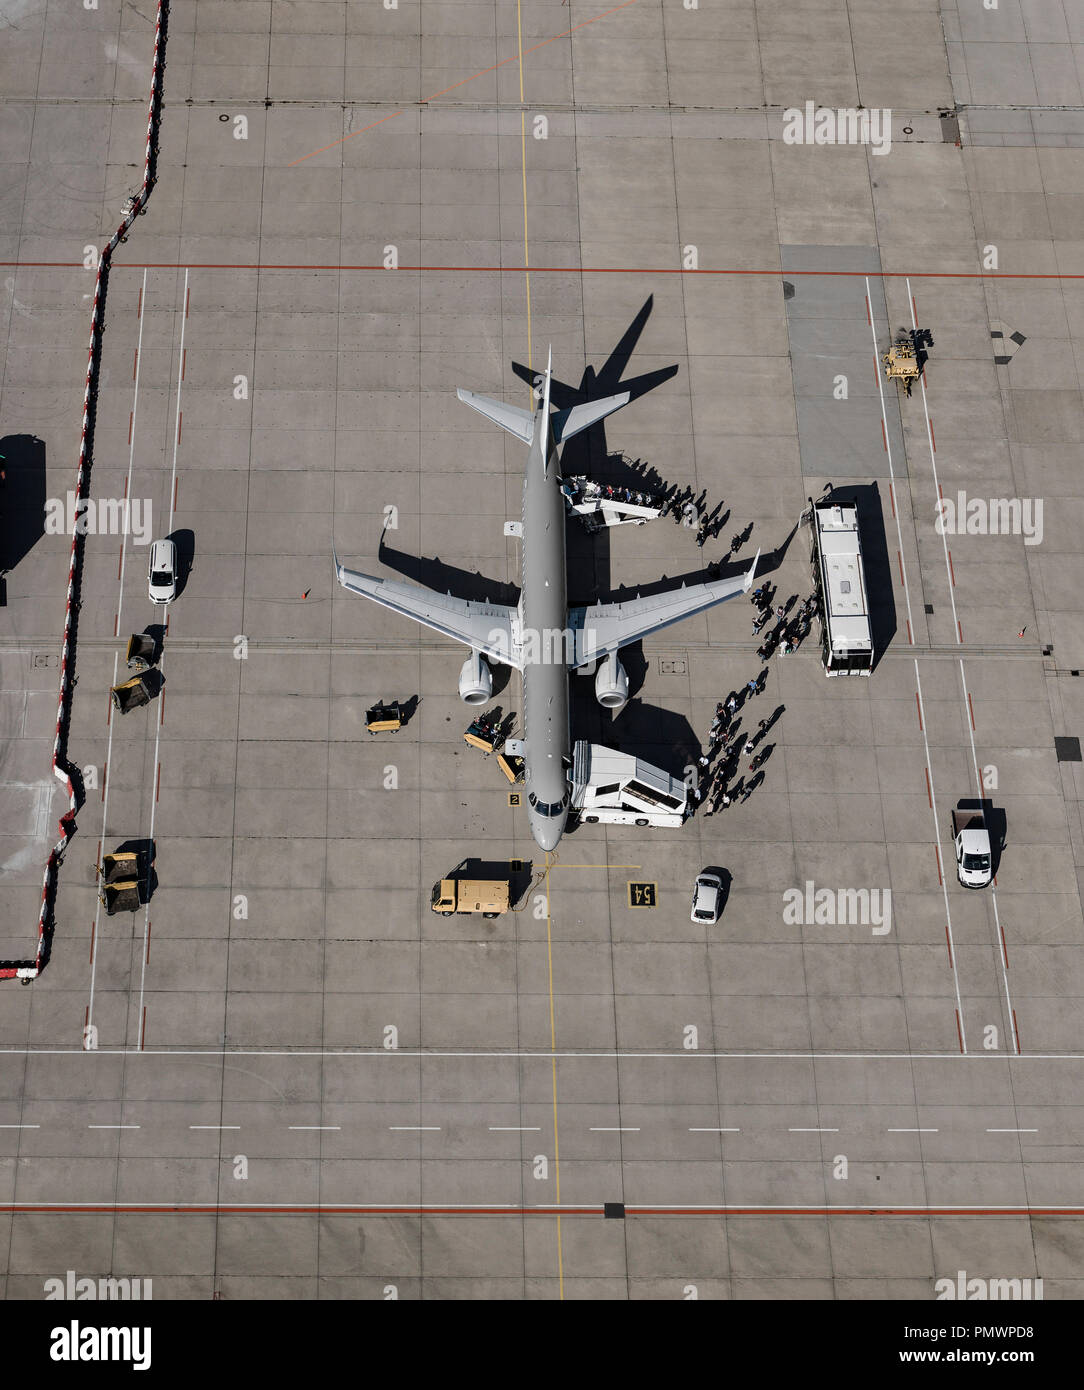 Aerial view of passengers boarding commercial airplane on tarmac at airport Stock Photo